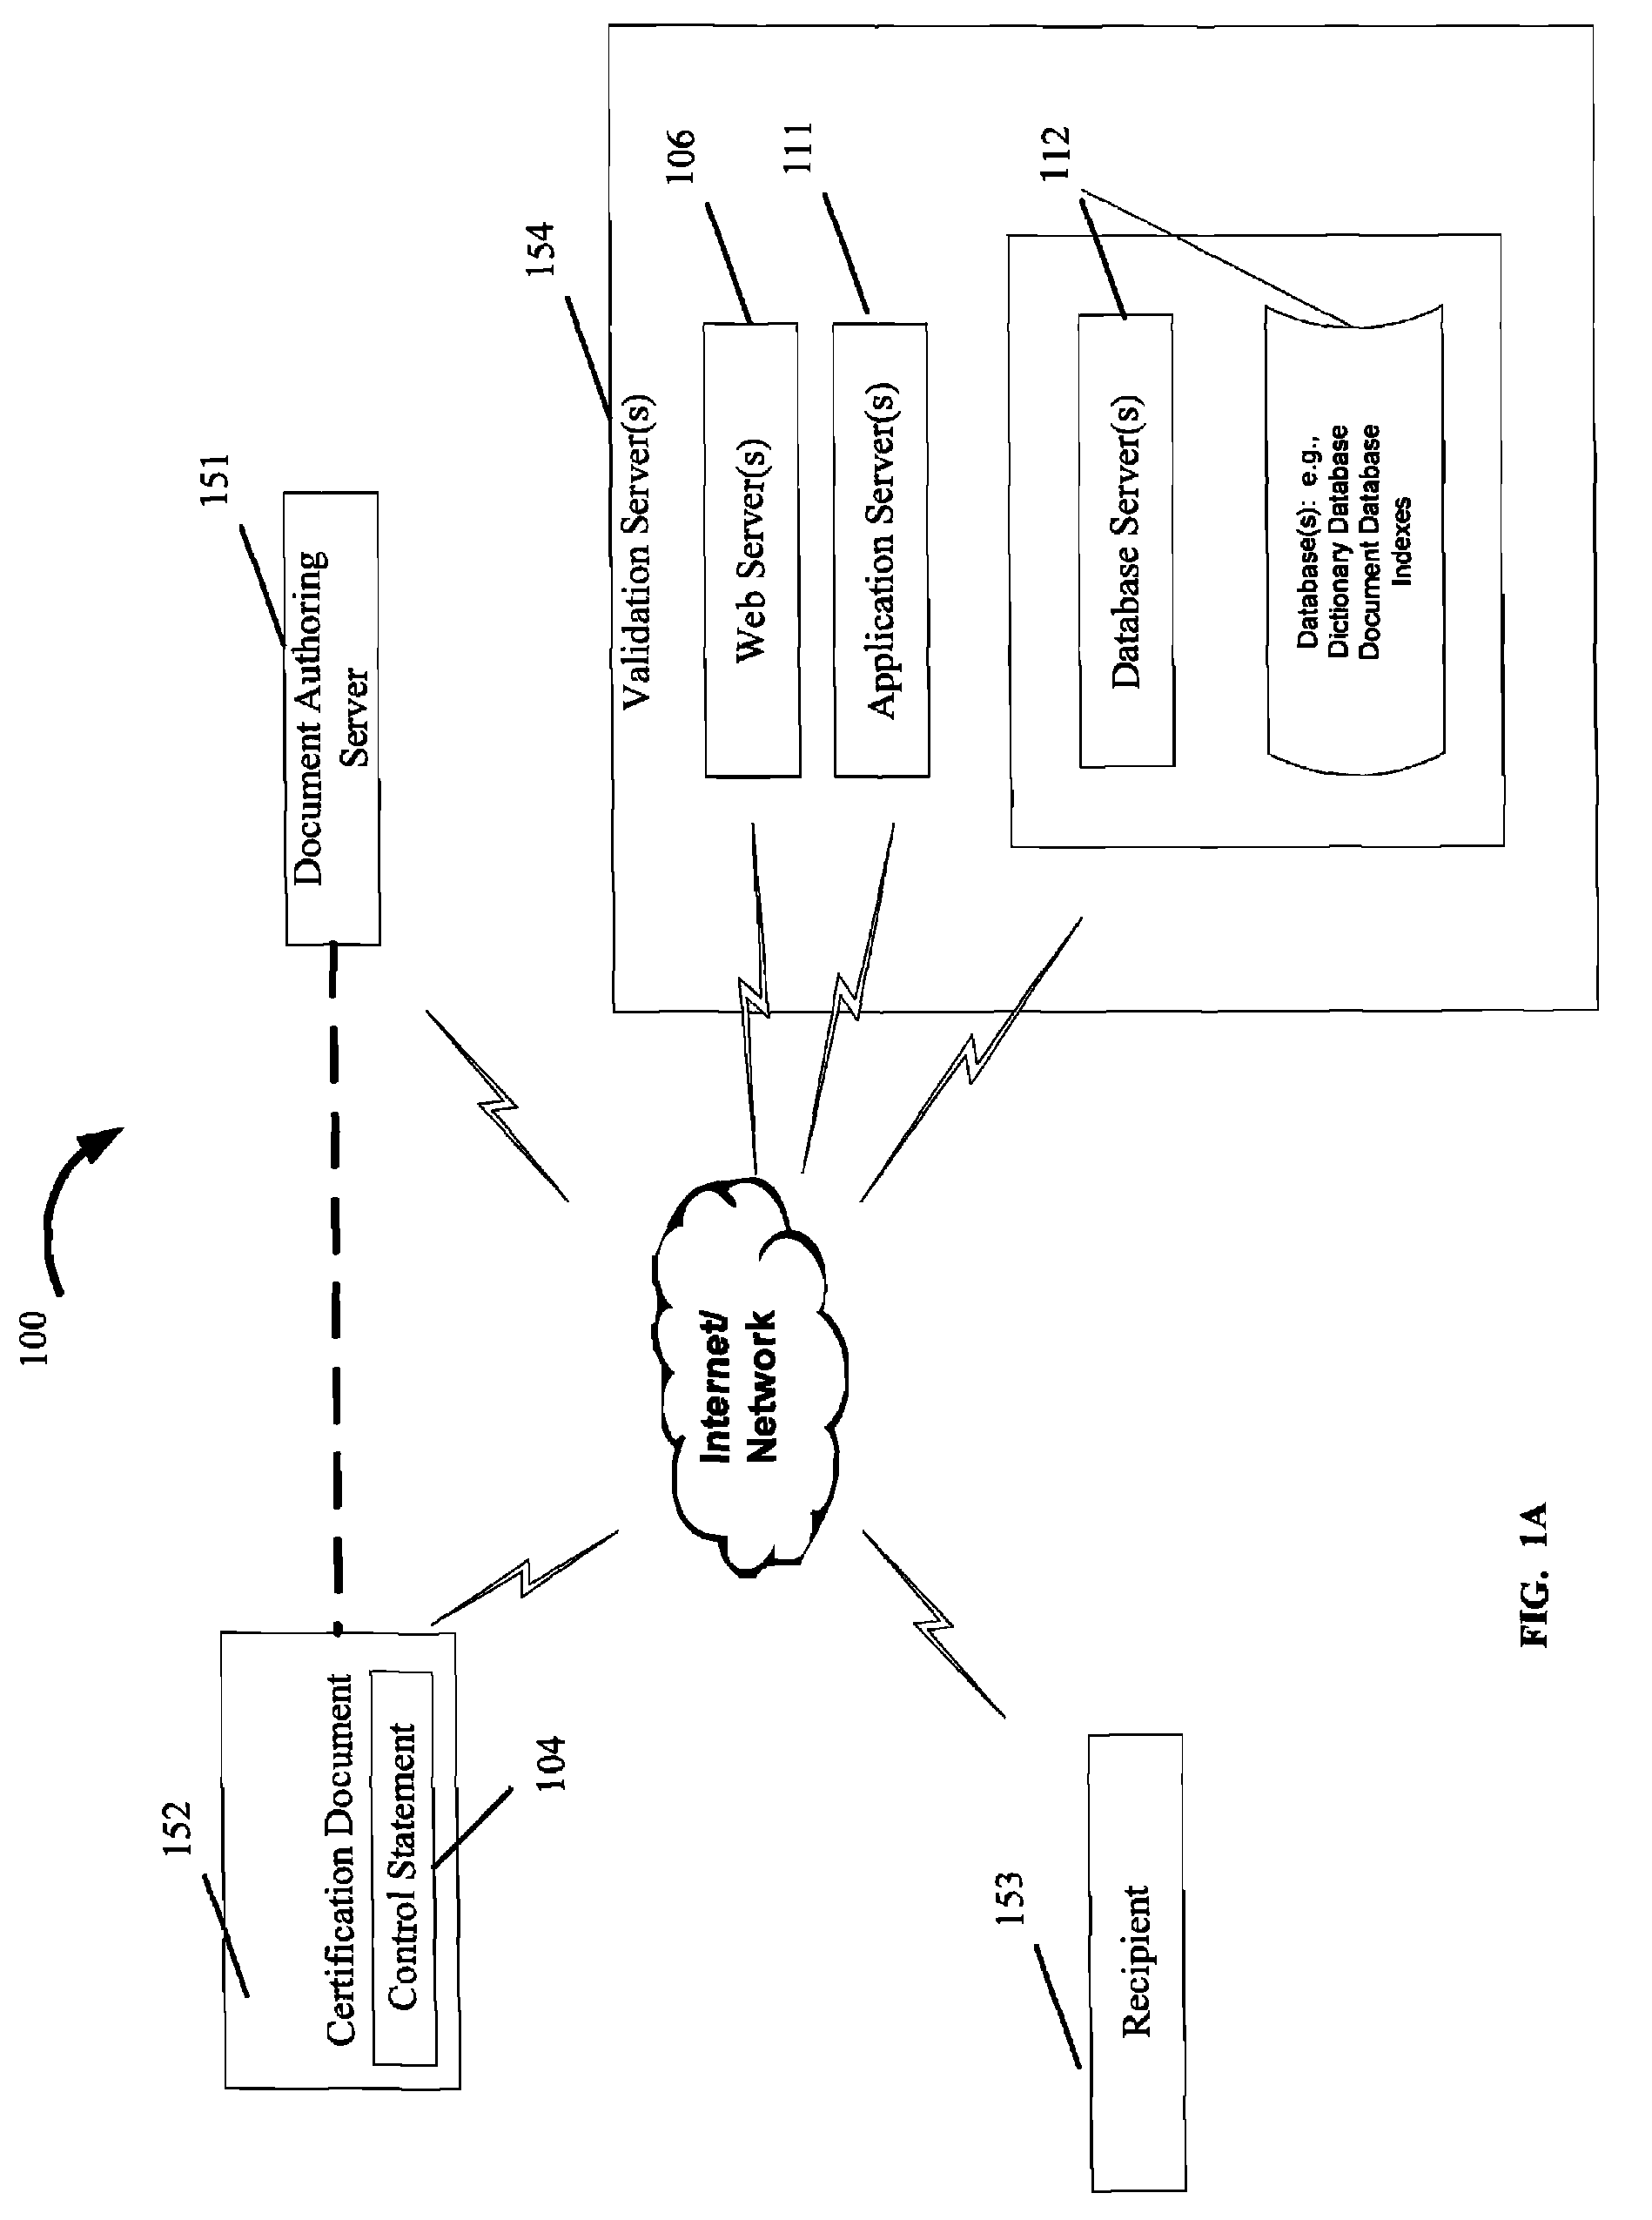 Document validation system and method